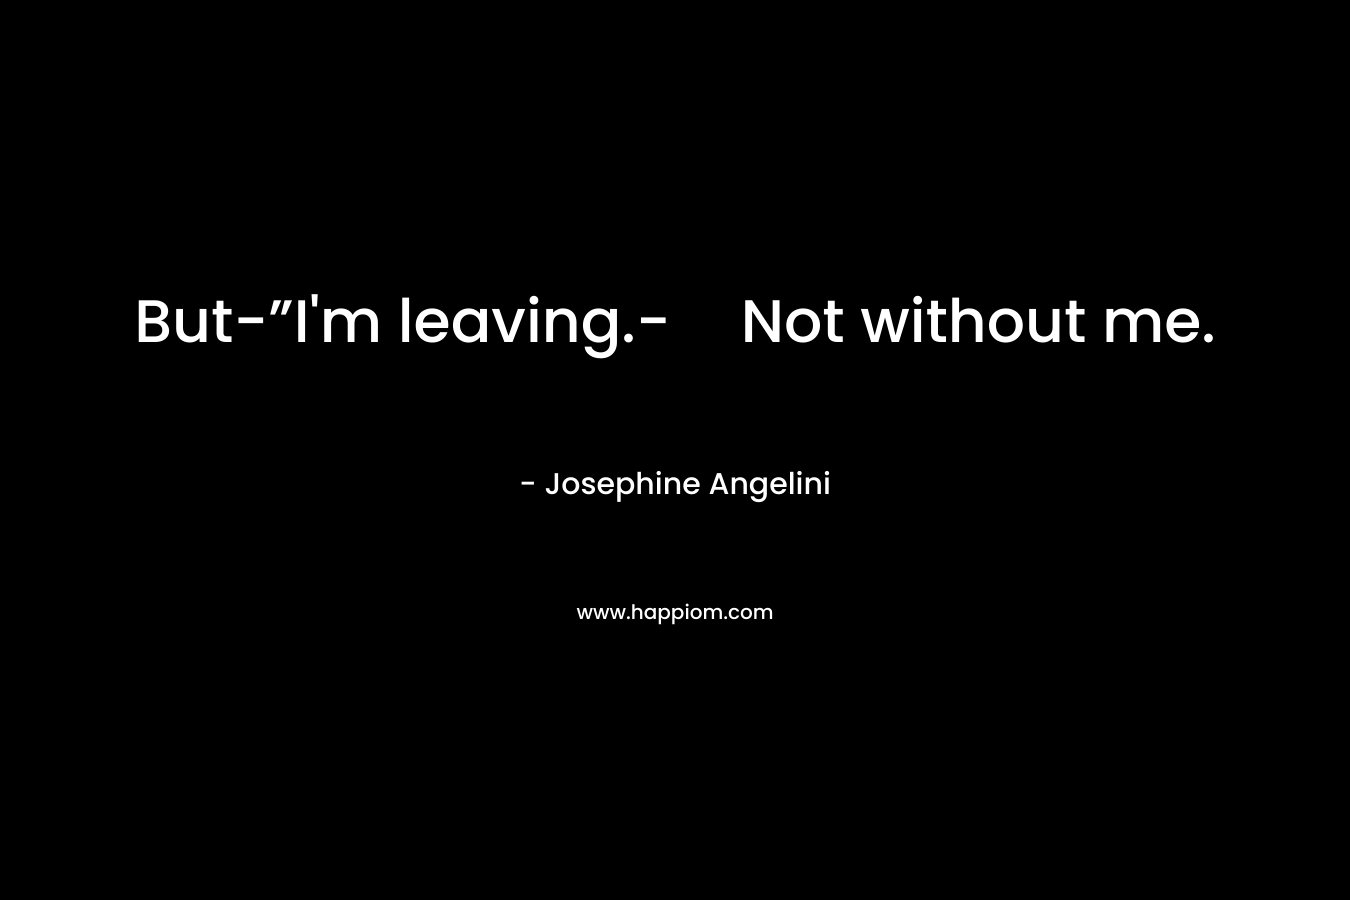 But-”I'm leaving.-Not without me.